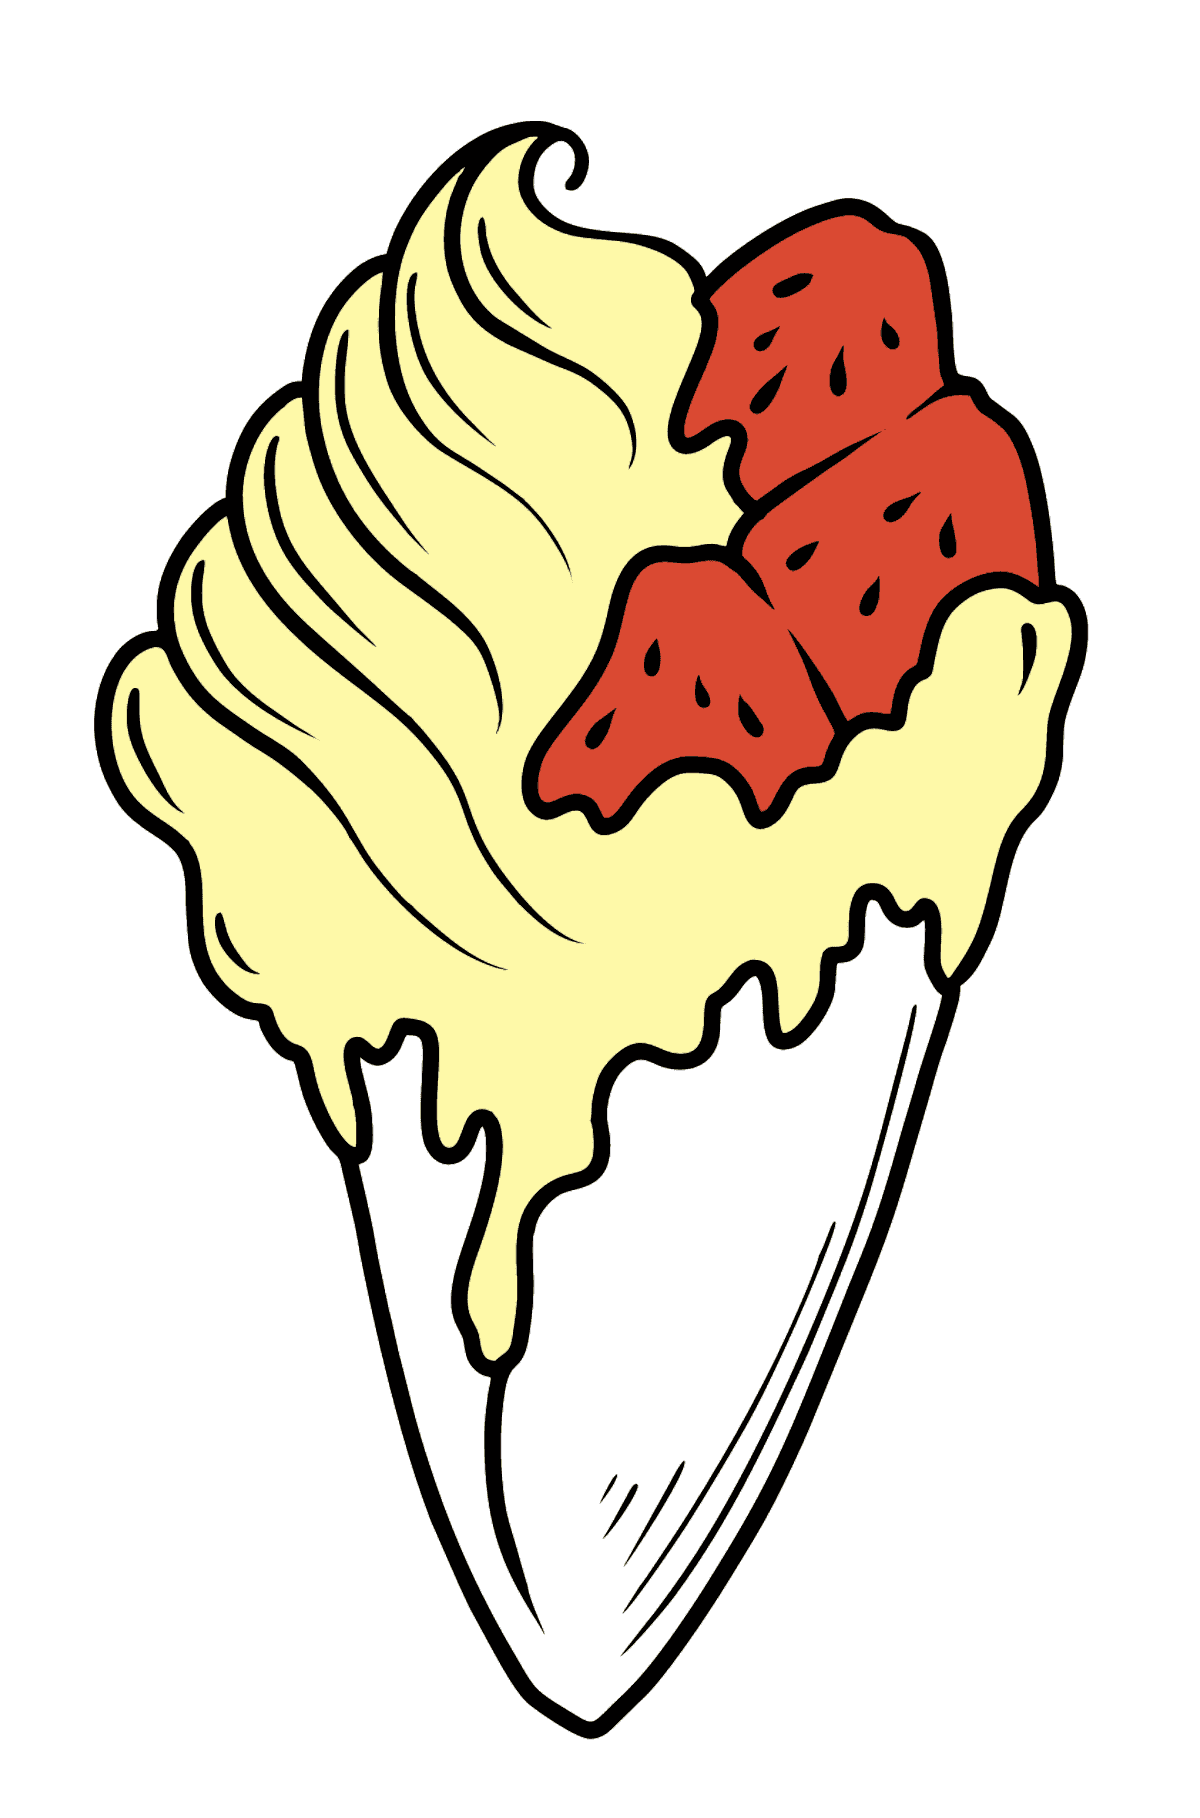 Banana Ice Cream and Jam Cone coloring page - Coloring Pages for Kids